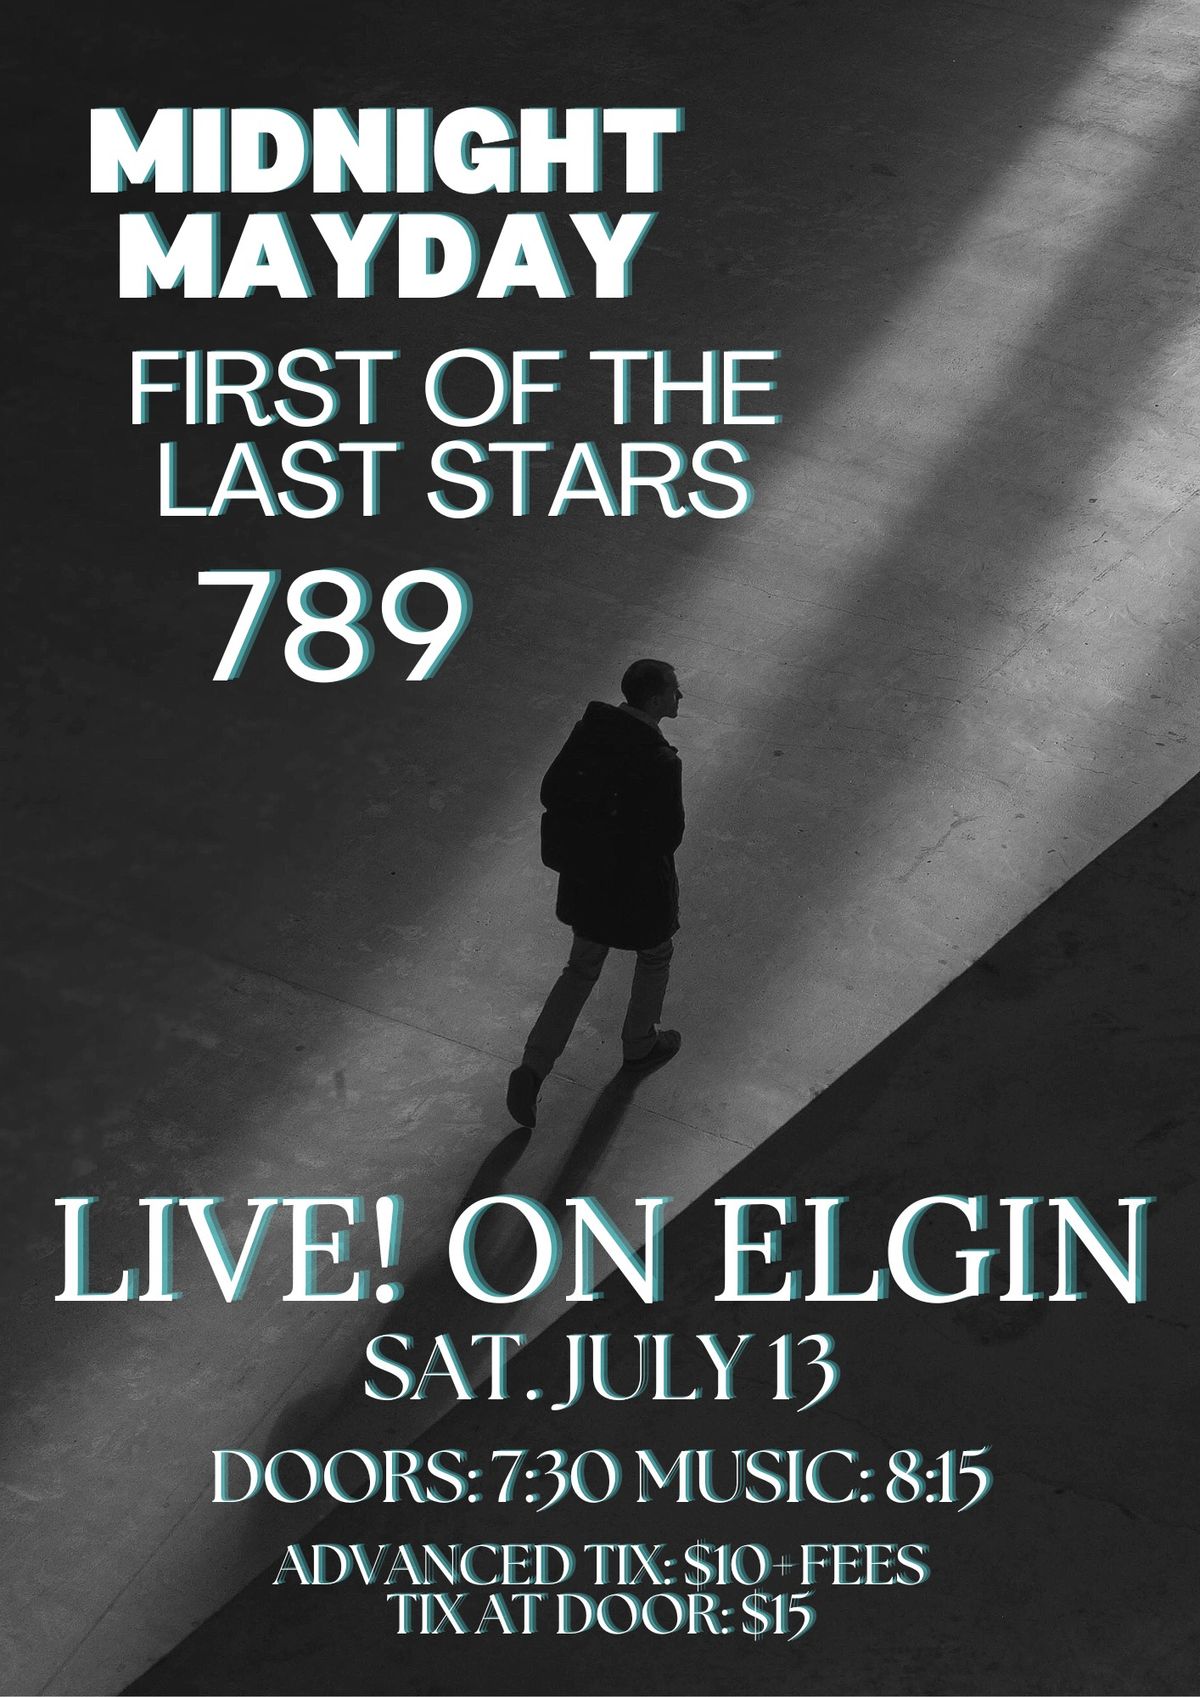 Midnight Mayday, First of The Last Stars and 789 @ Live! on Elgin